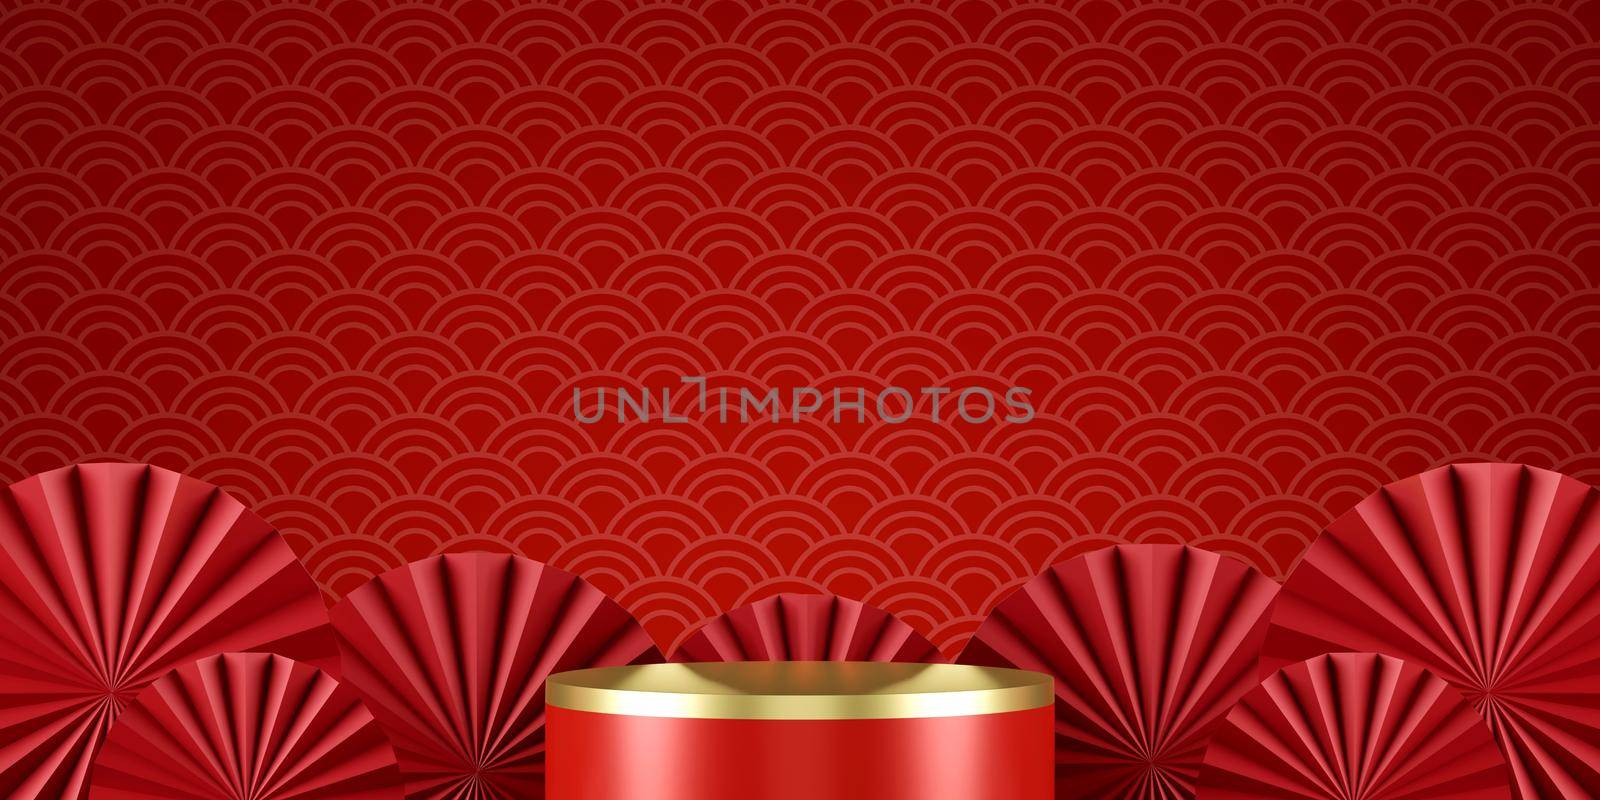 3d illustration of Chinese new year banner with podium for product advertisement by nutzchotwarut